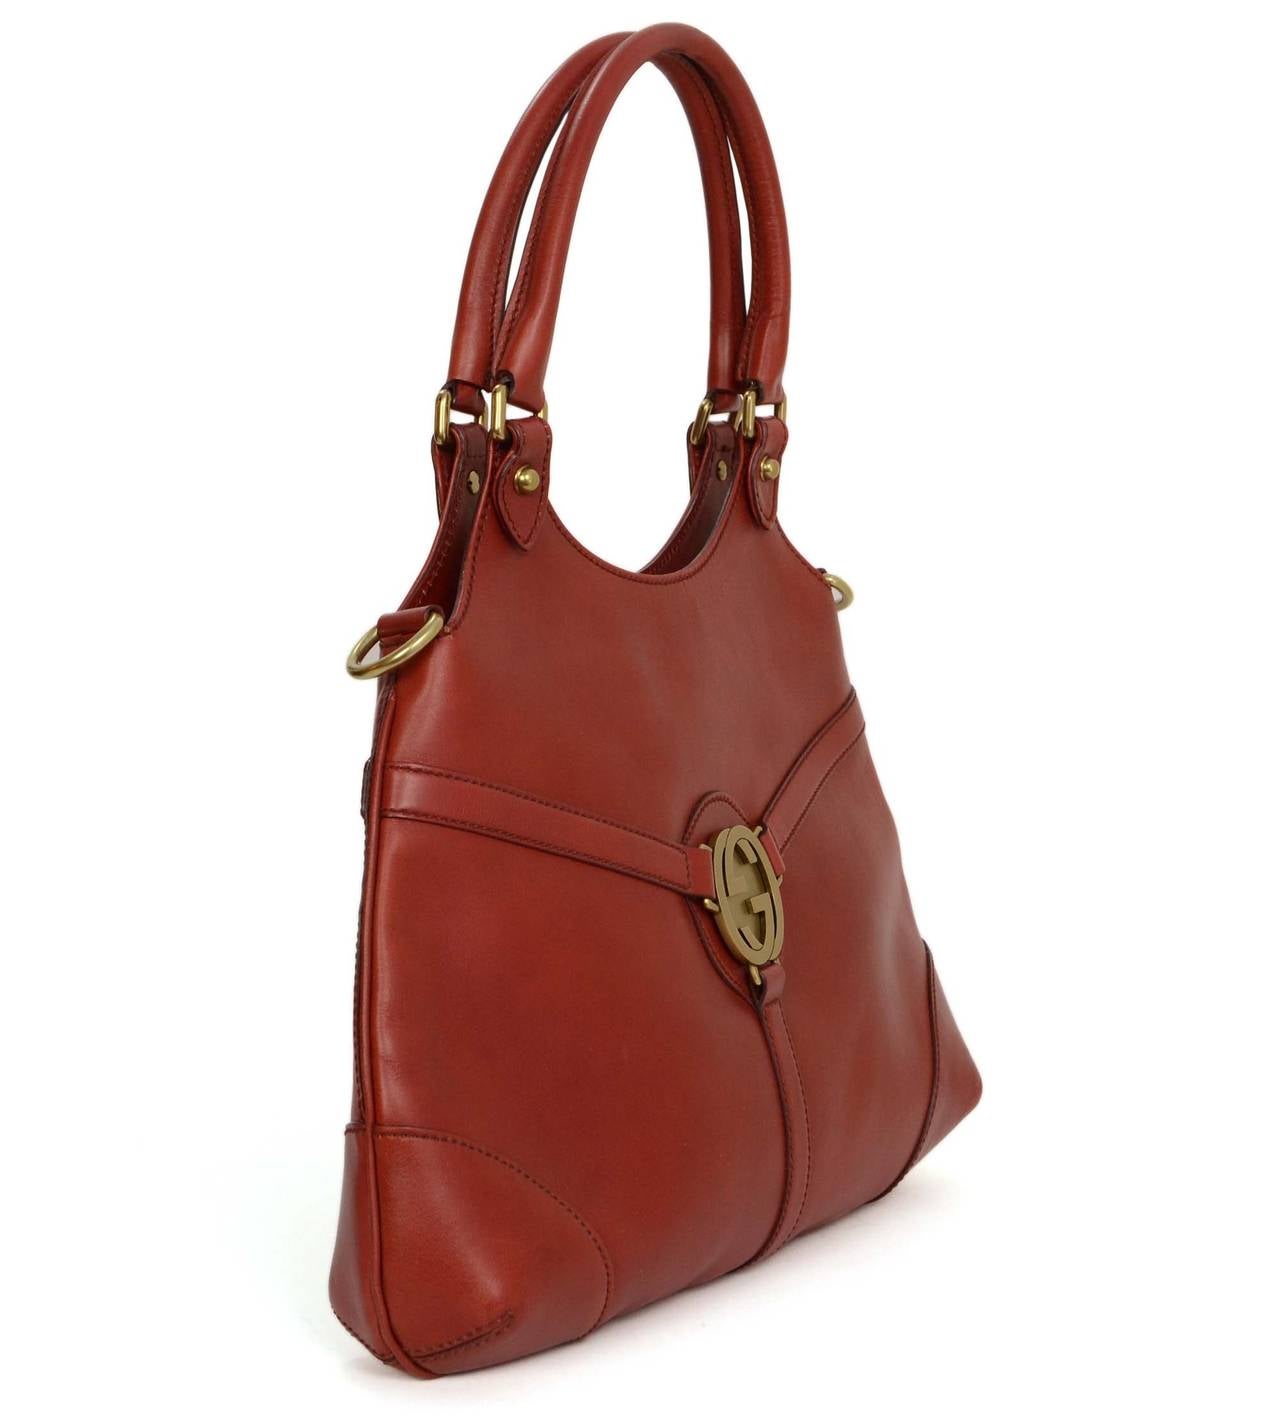 Gucci Rust Leather Shoulder Bag
Features large brass GG logo on front of bag

    Made in: Italy
    Color: Rust
    Hardware: Brass
    Materials: Leather and metal
    Lining: Rust suede
    Closure/opening: Open top
    Exterior